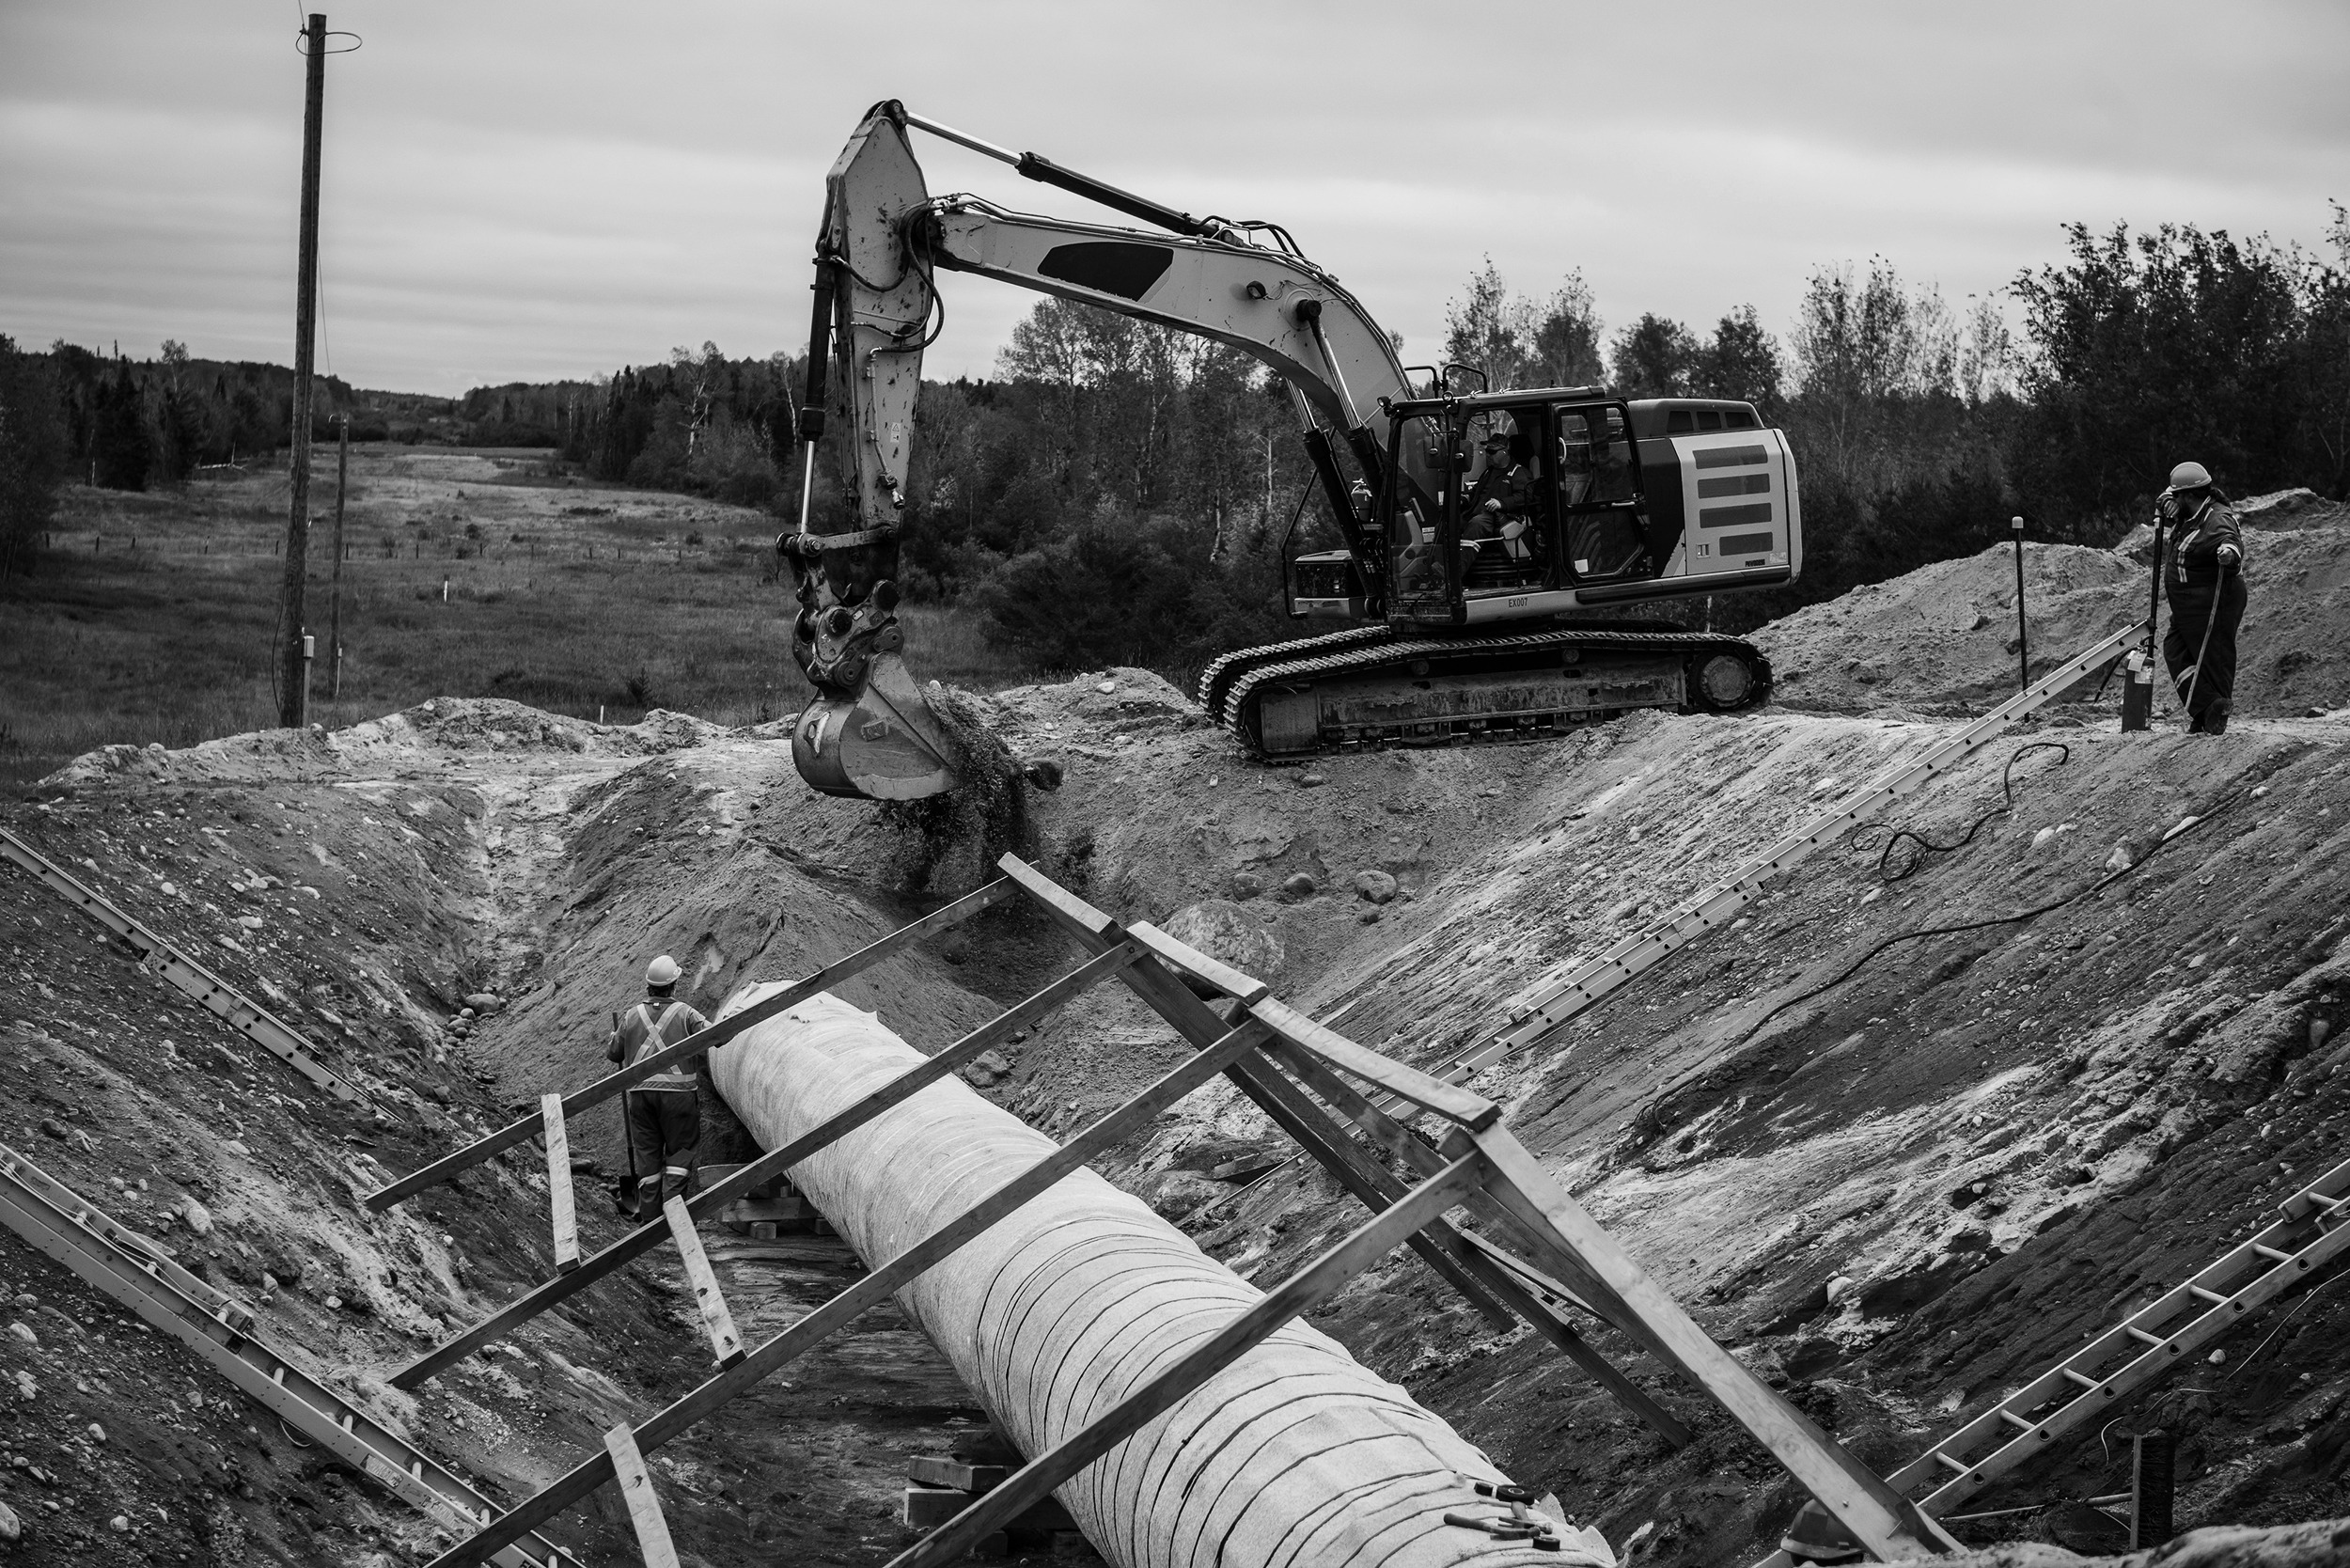 An excavator backfilling a pipeline dig site.